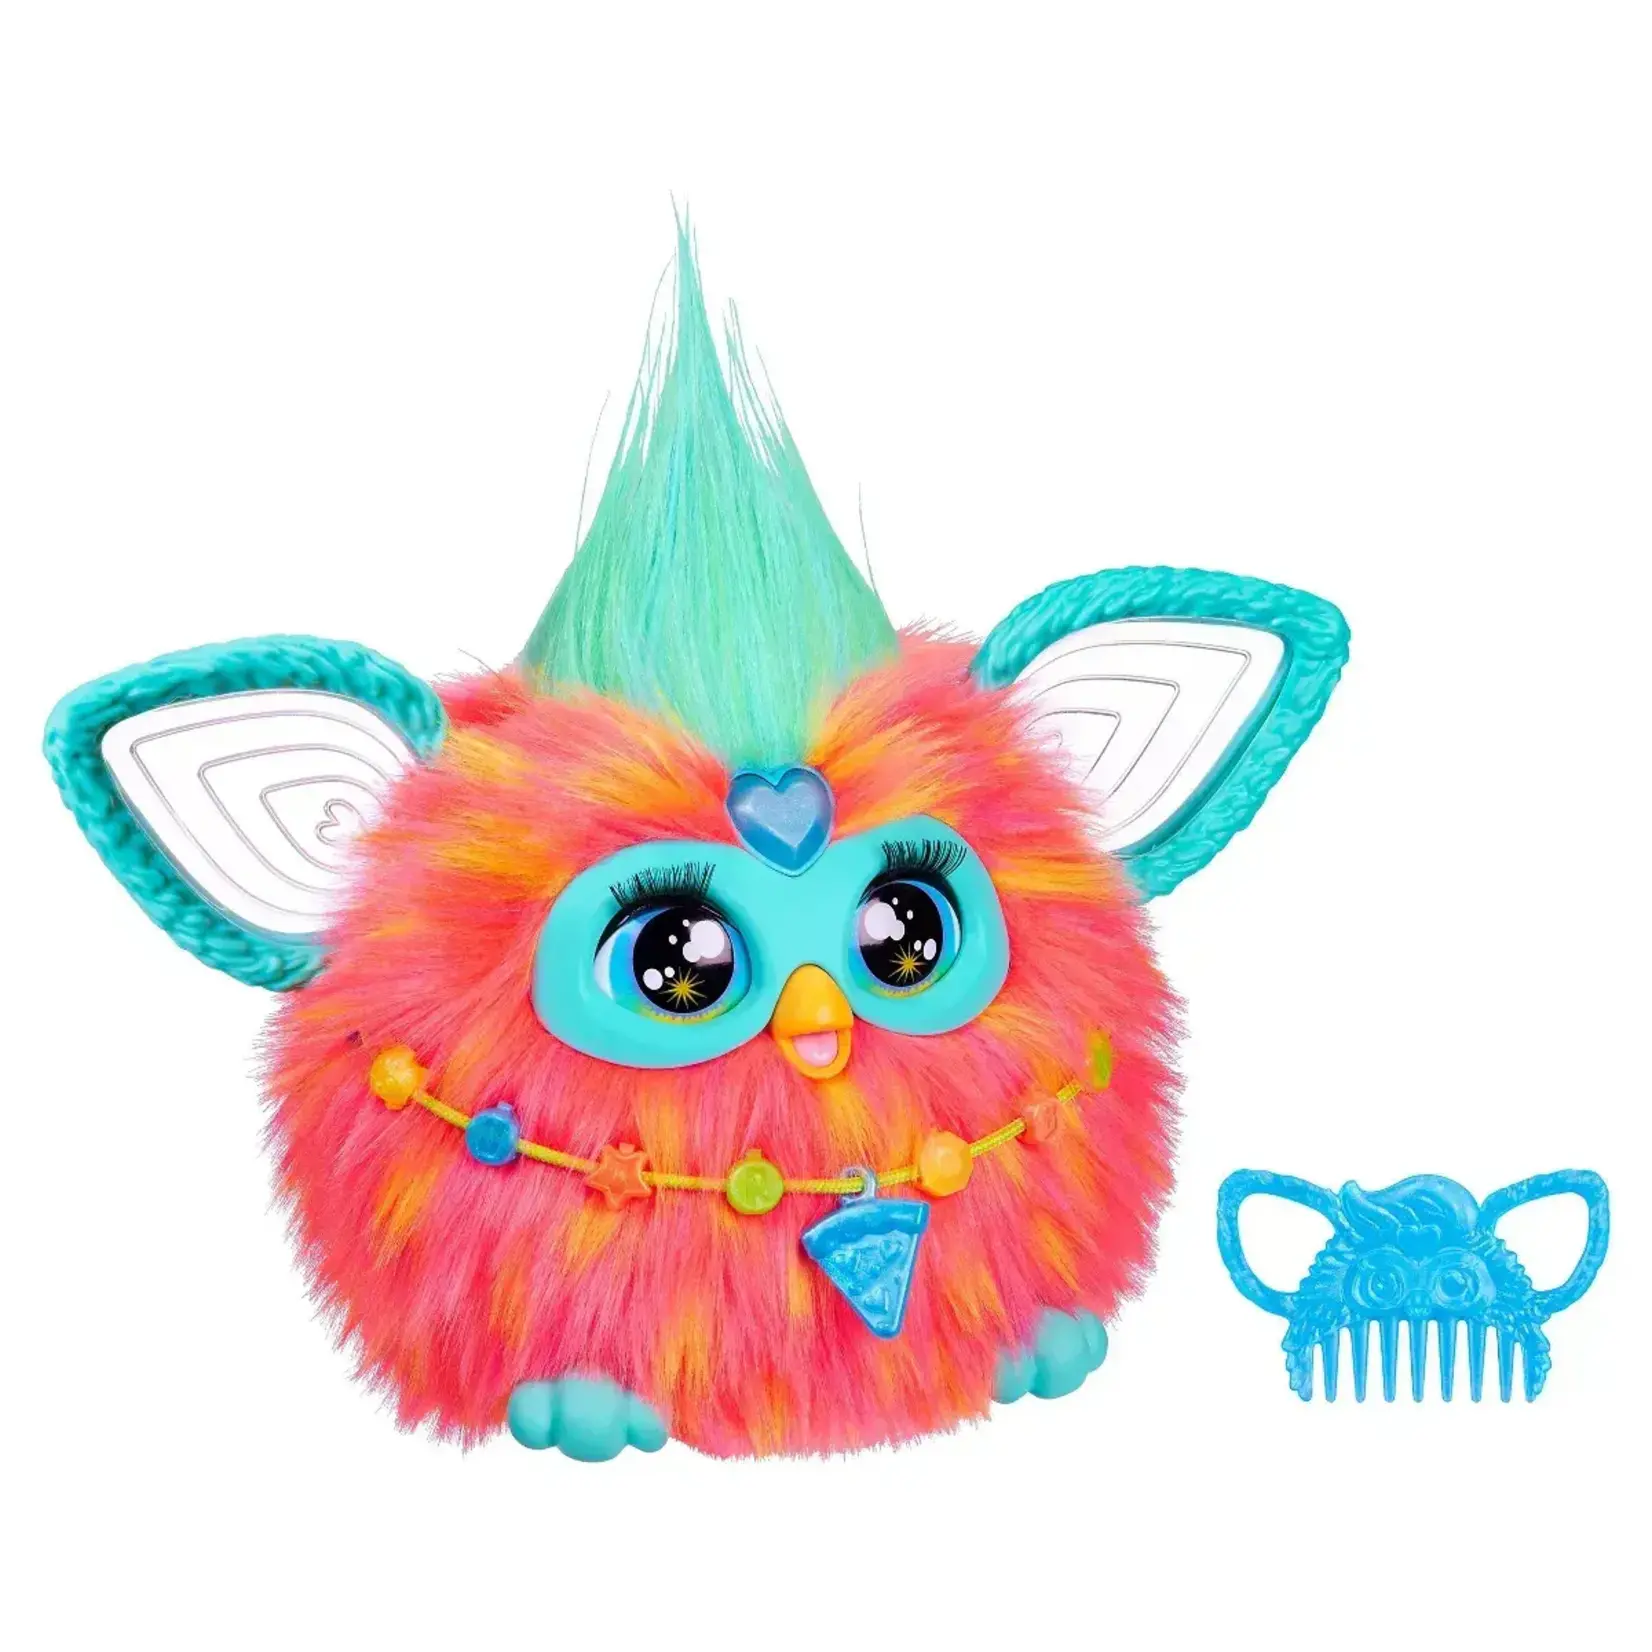 Furby Furby Coral Interactive Plush Toy